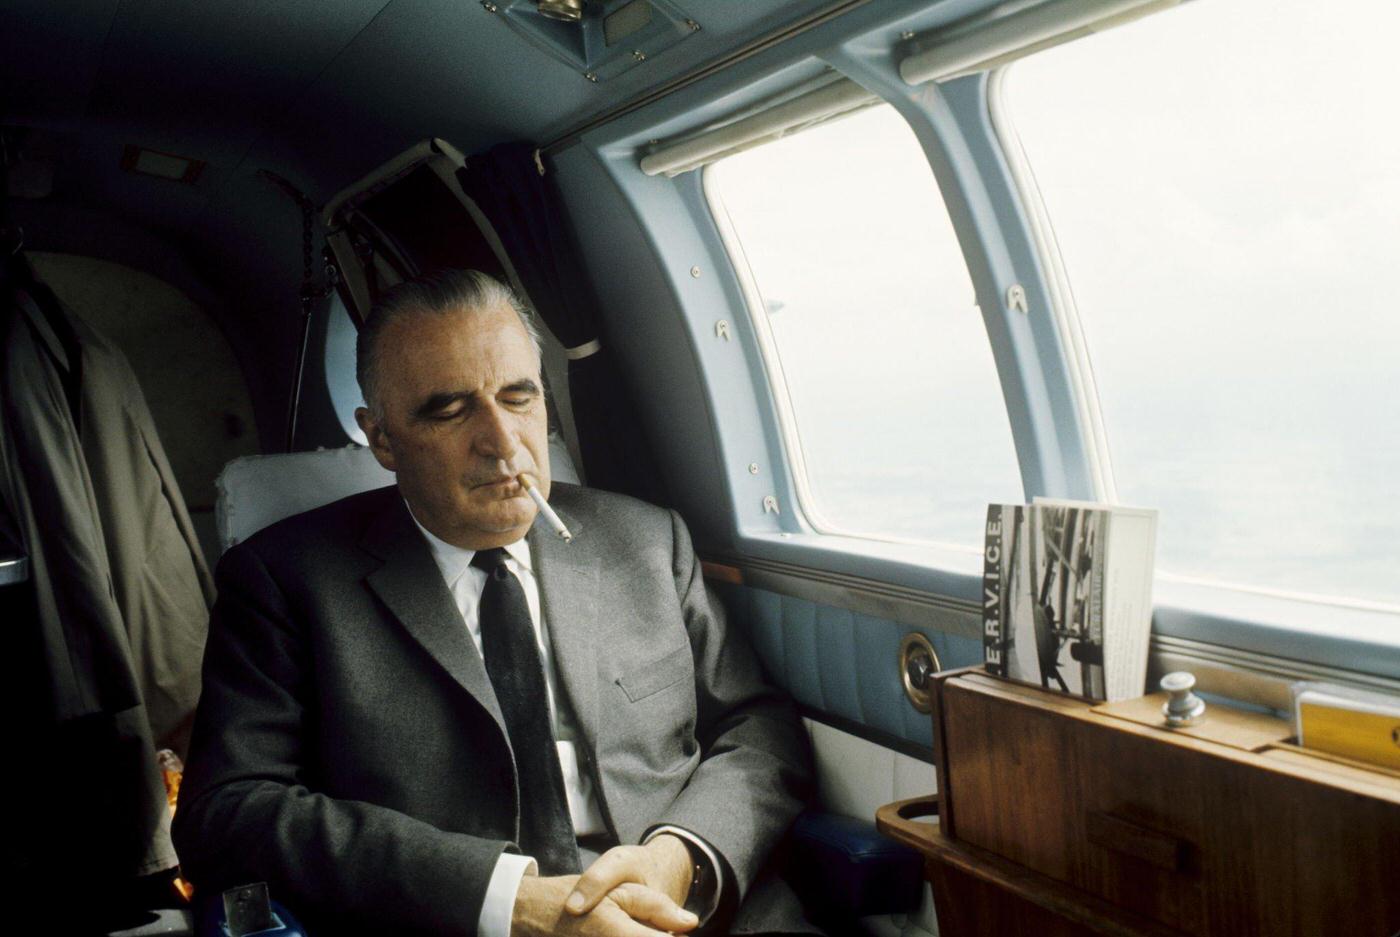 Georges Pompidou smoking a cigarette with his eyes closed, sitting near a window on an airplane during his 1969 presidential campaign.